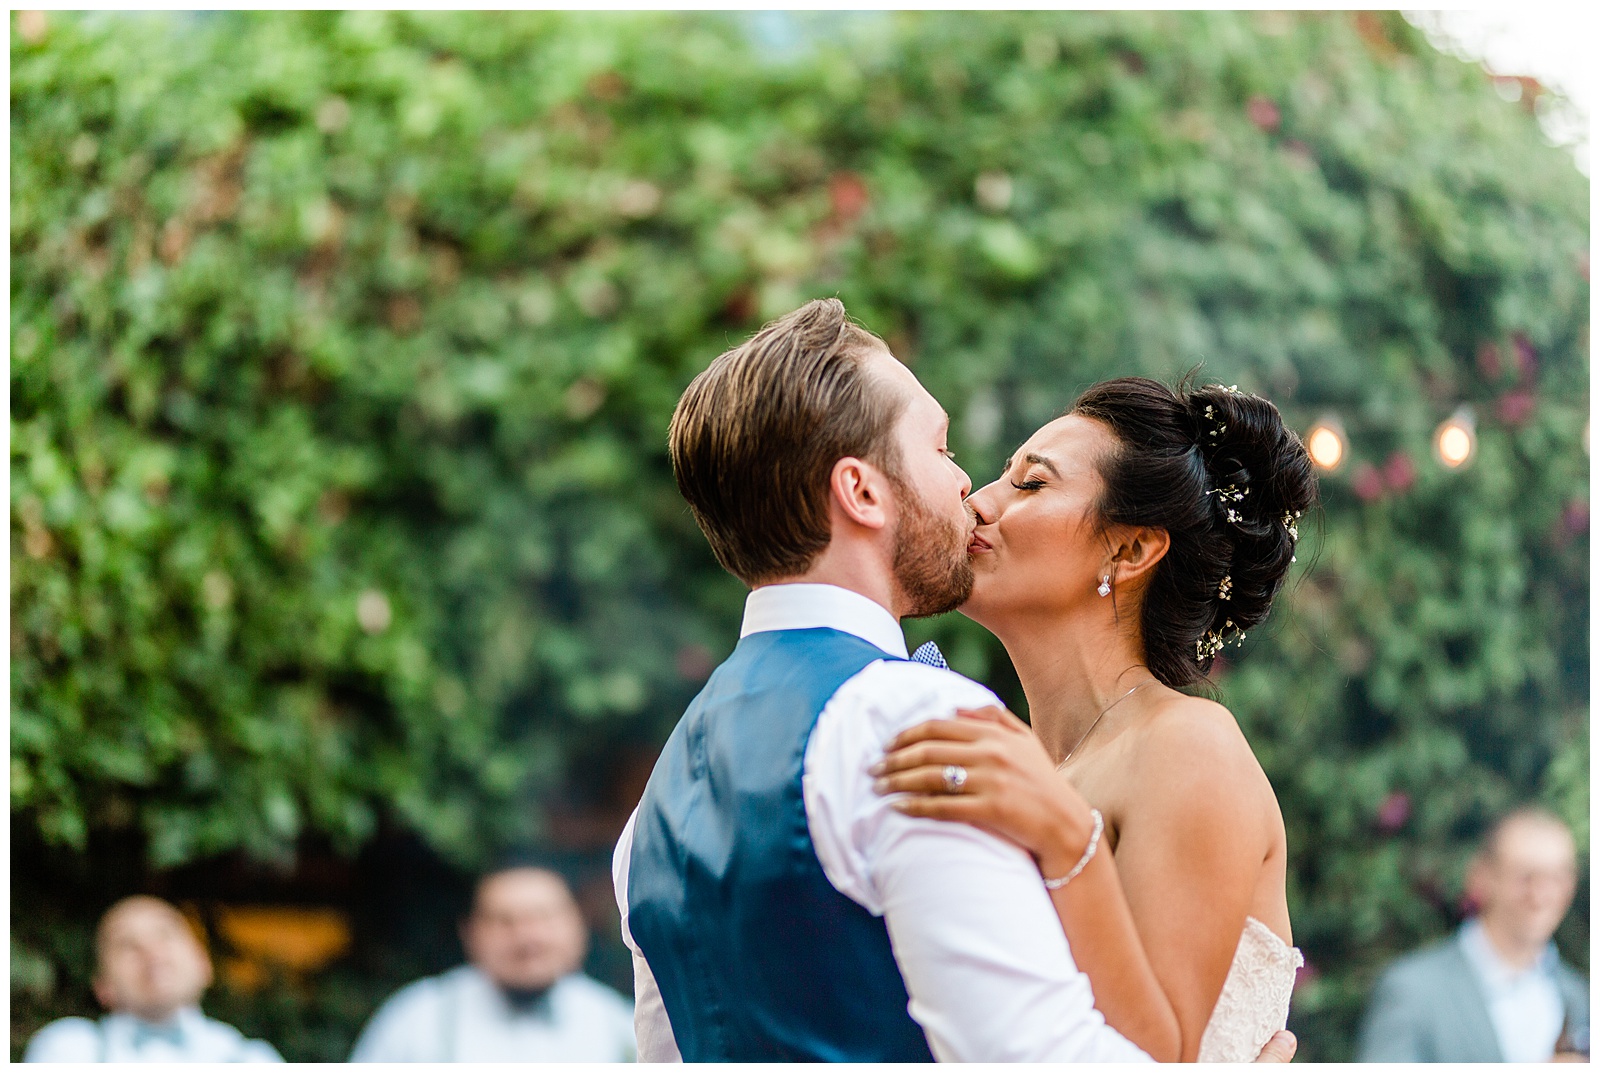 sweet moment of the bride and groom emotionally kissing during their first wedding dance